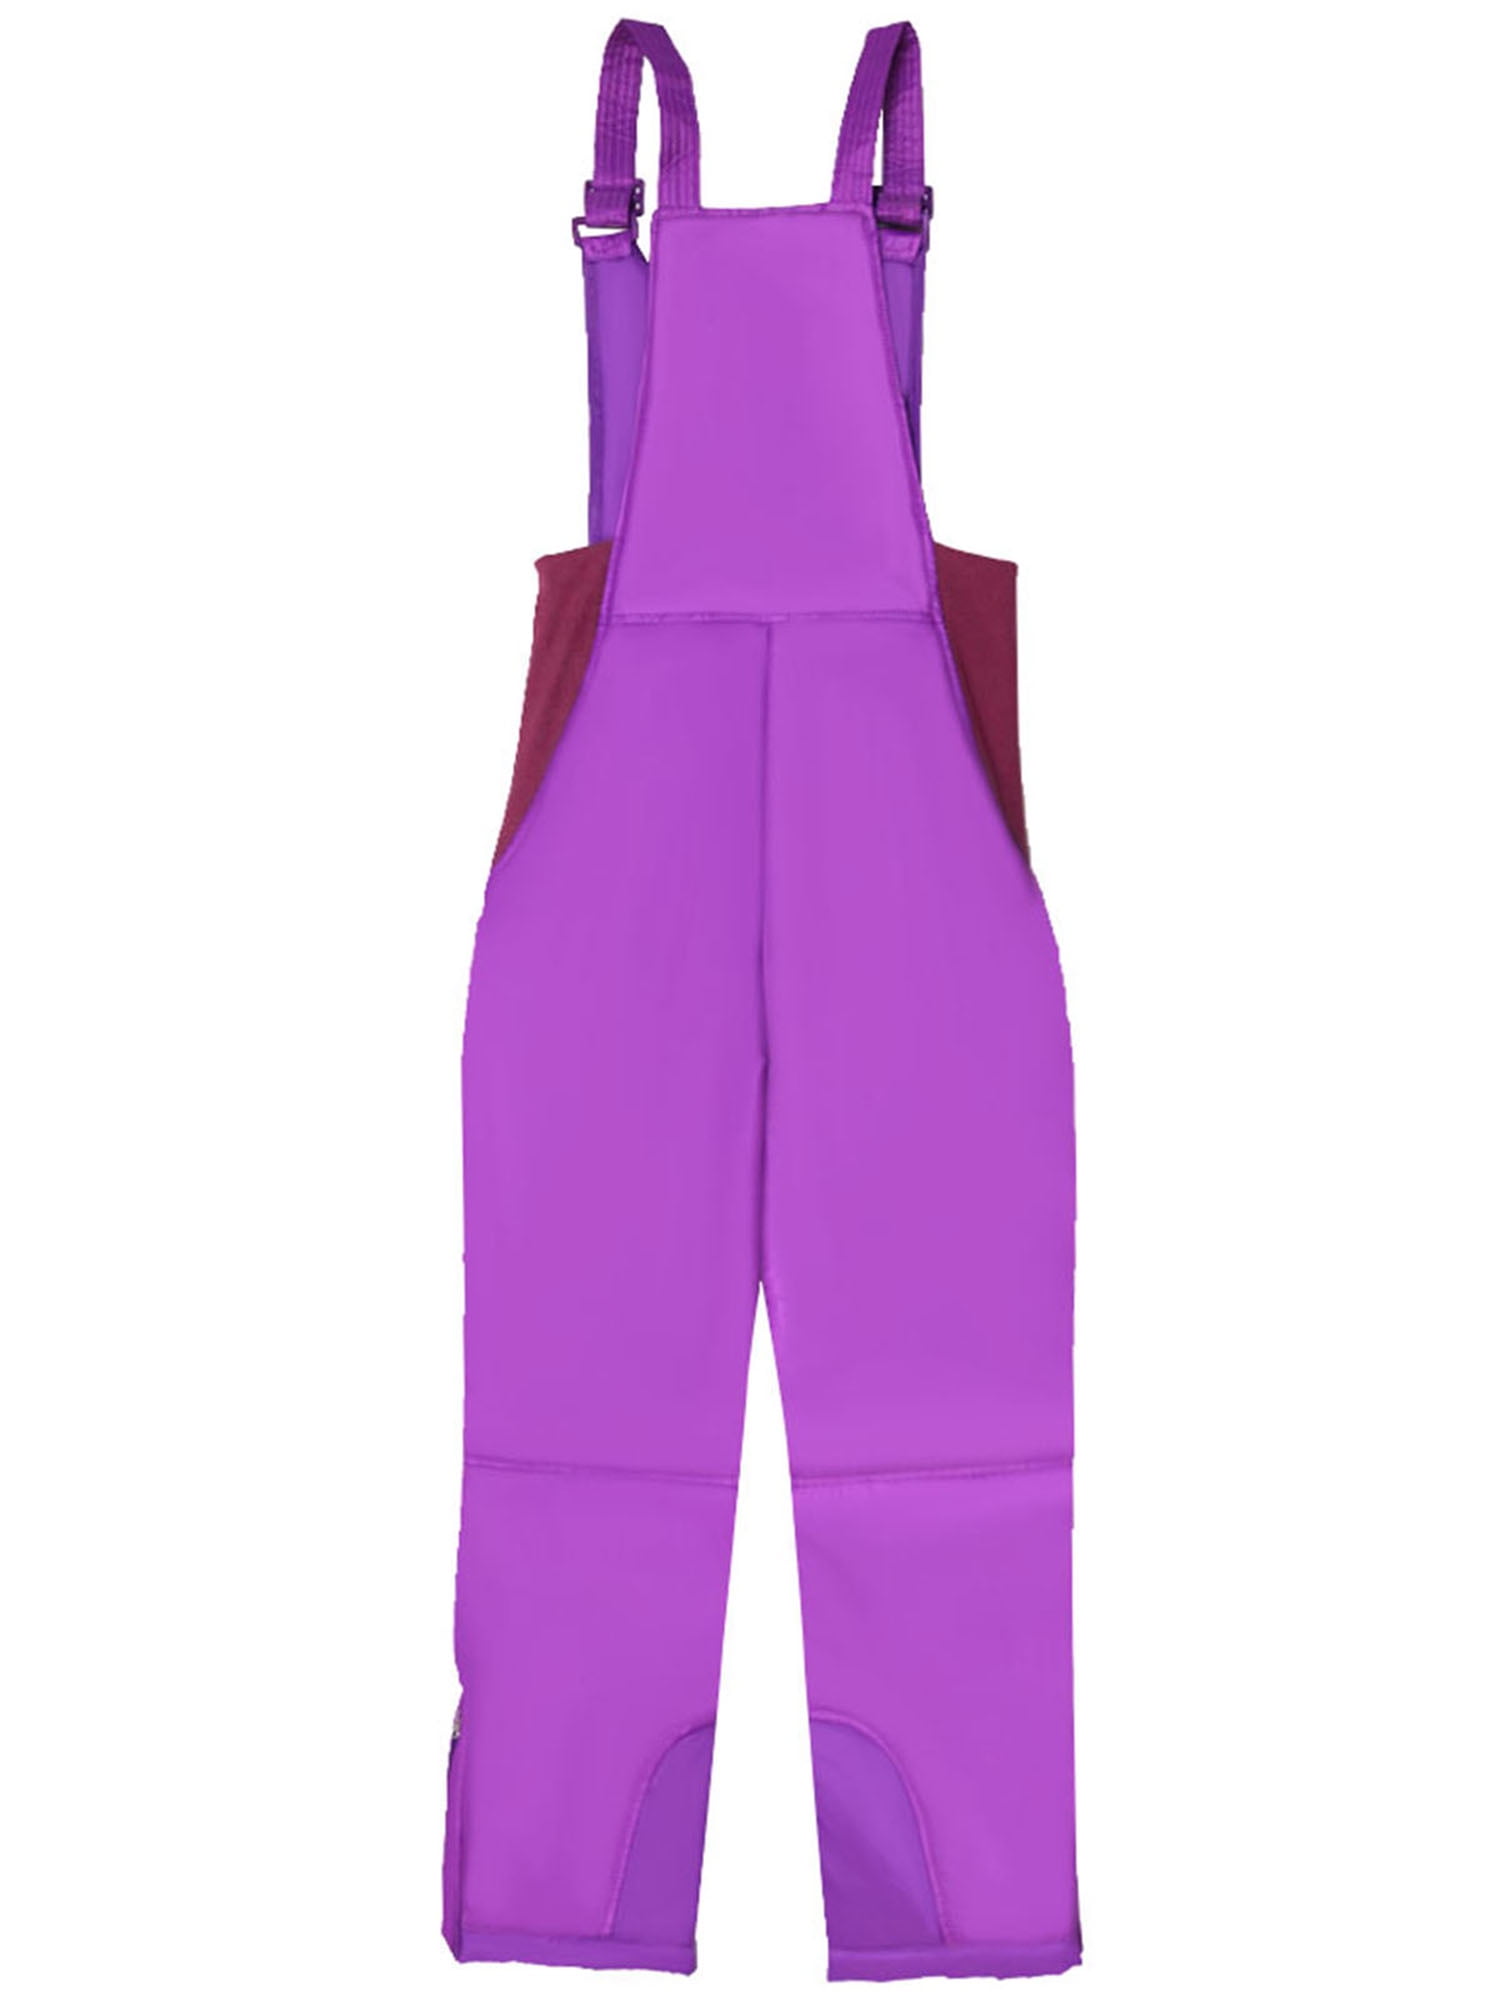 Nituyy Women's Sleeveless Ski Overalls, Adjustable Shoulder Strap Jumpsuit,  Side Pocket Long One-Piece Clothes